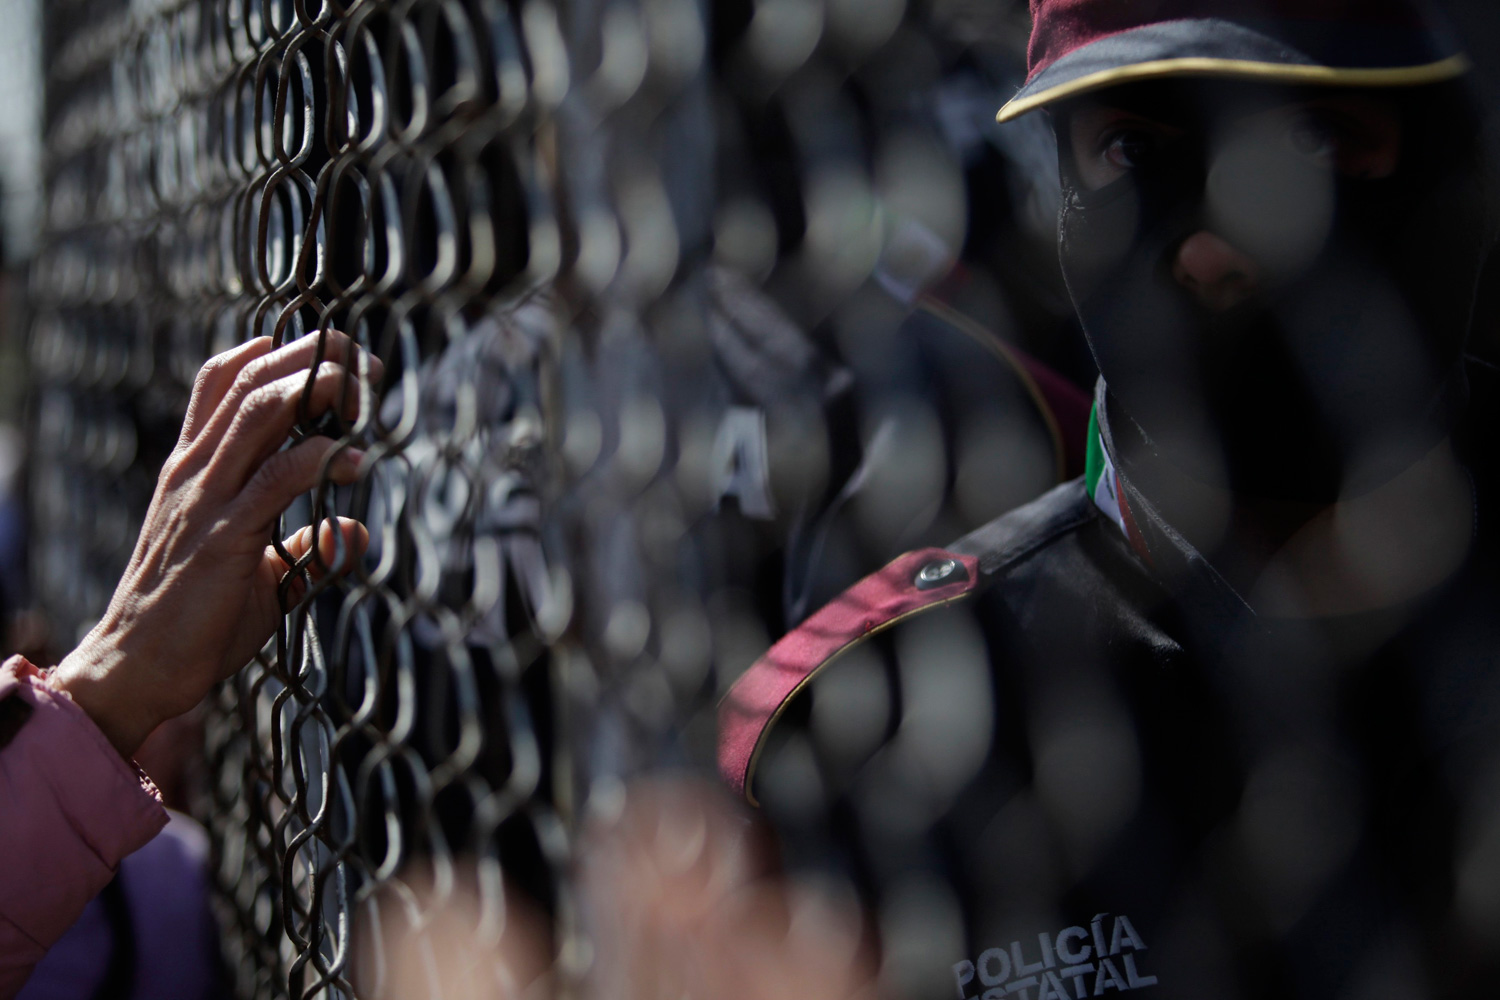 Feb. 19, 2012. A relative of an inmate waits next to a fence for news as a police officer stands guard inside a state prison in Apodaca, on the outskirts of Monterrey, Mexico.